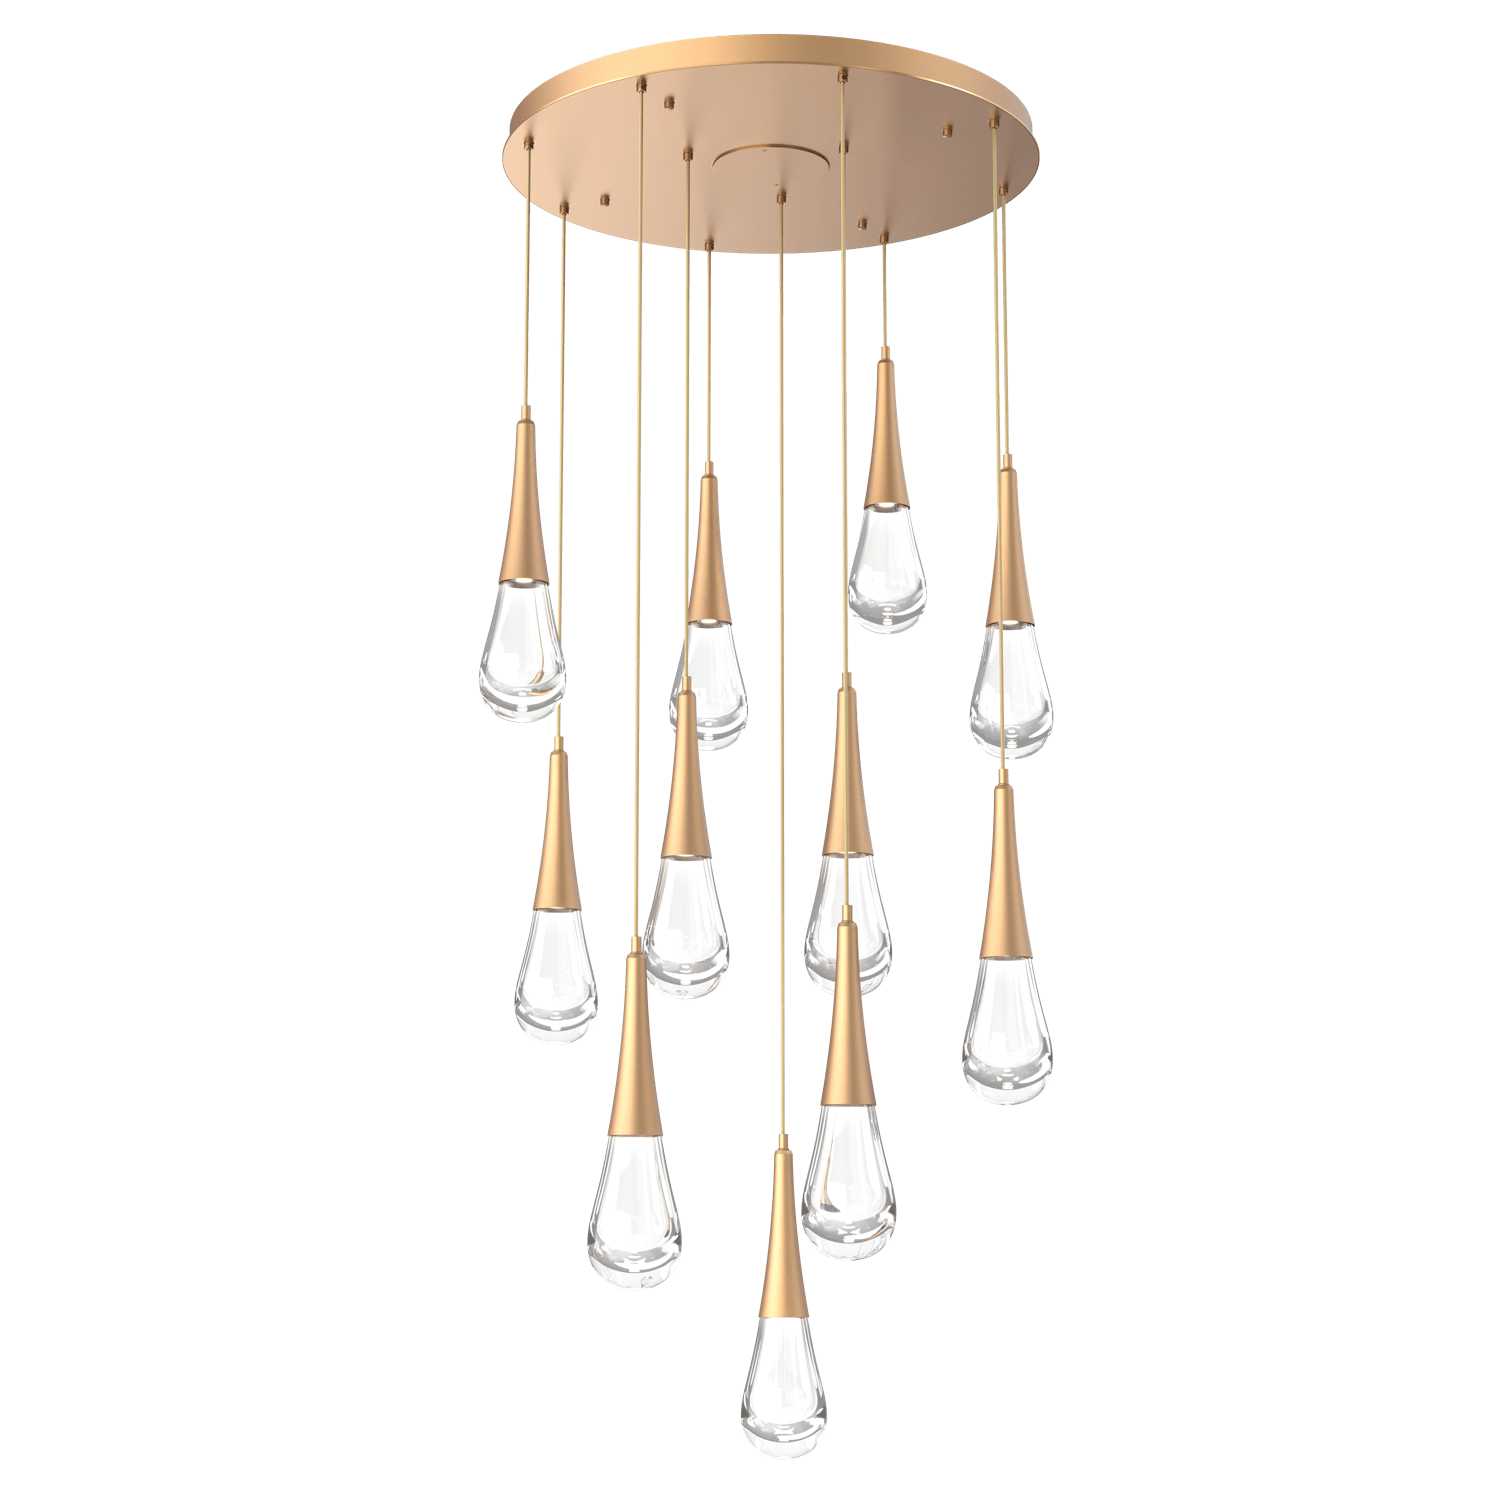 CHB0078-11-NB-Hammerton-Studio-Raindrop-11-light-round-pendant-chandelier-with-novel-brass-finish-and-clear-blown-glass-shades-and-LED-lamping